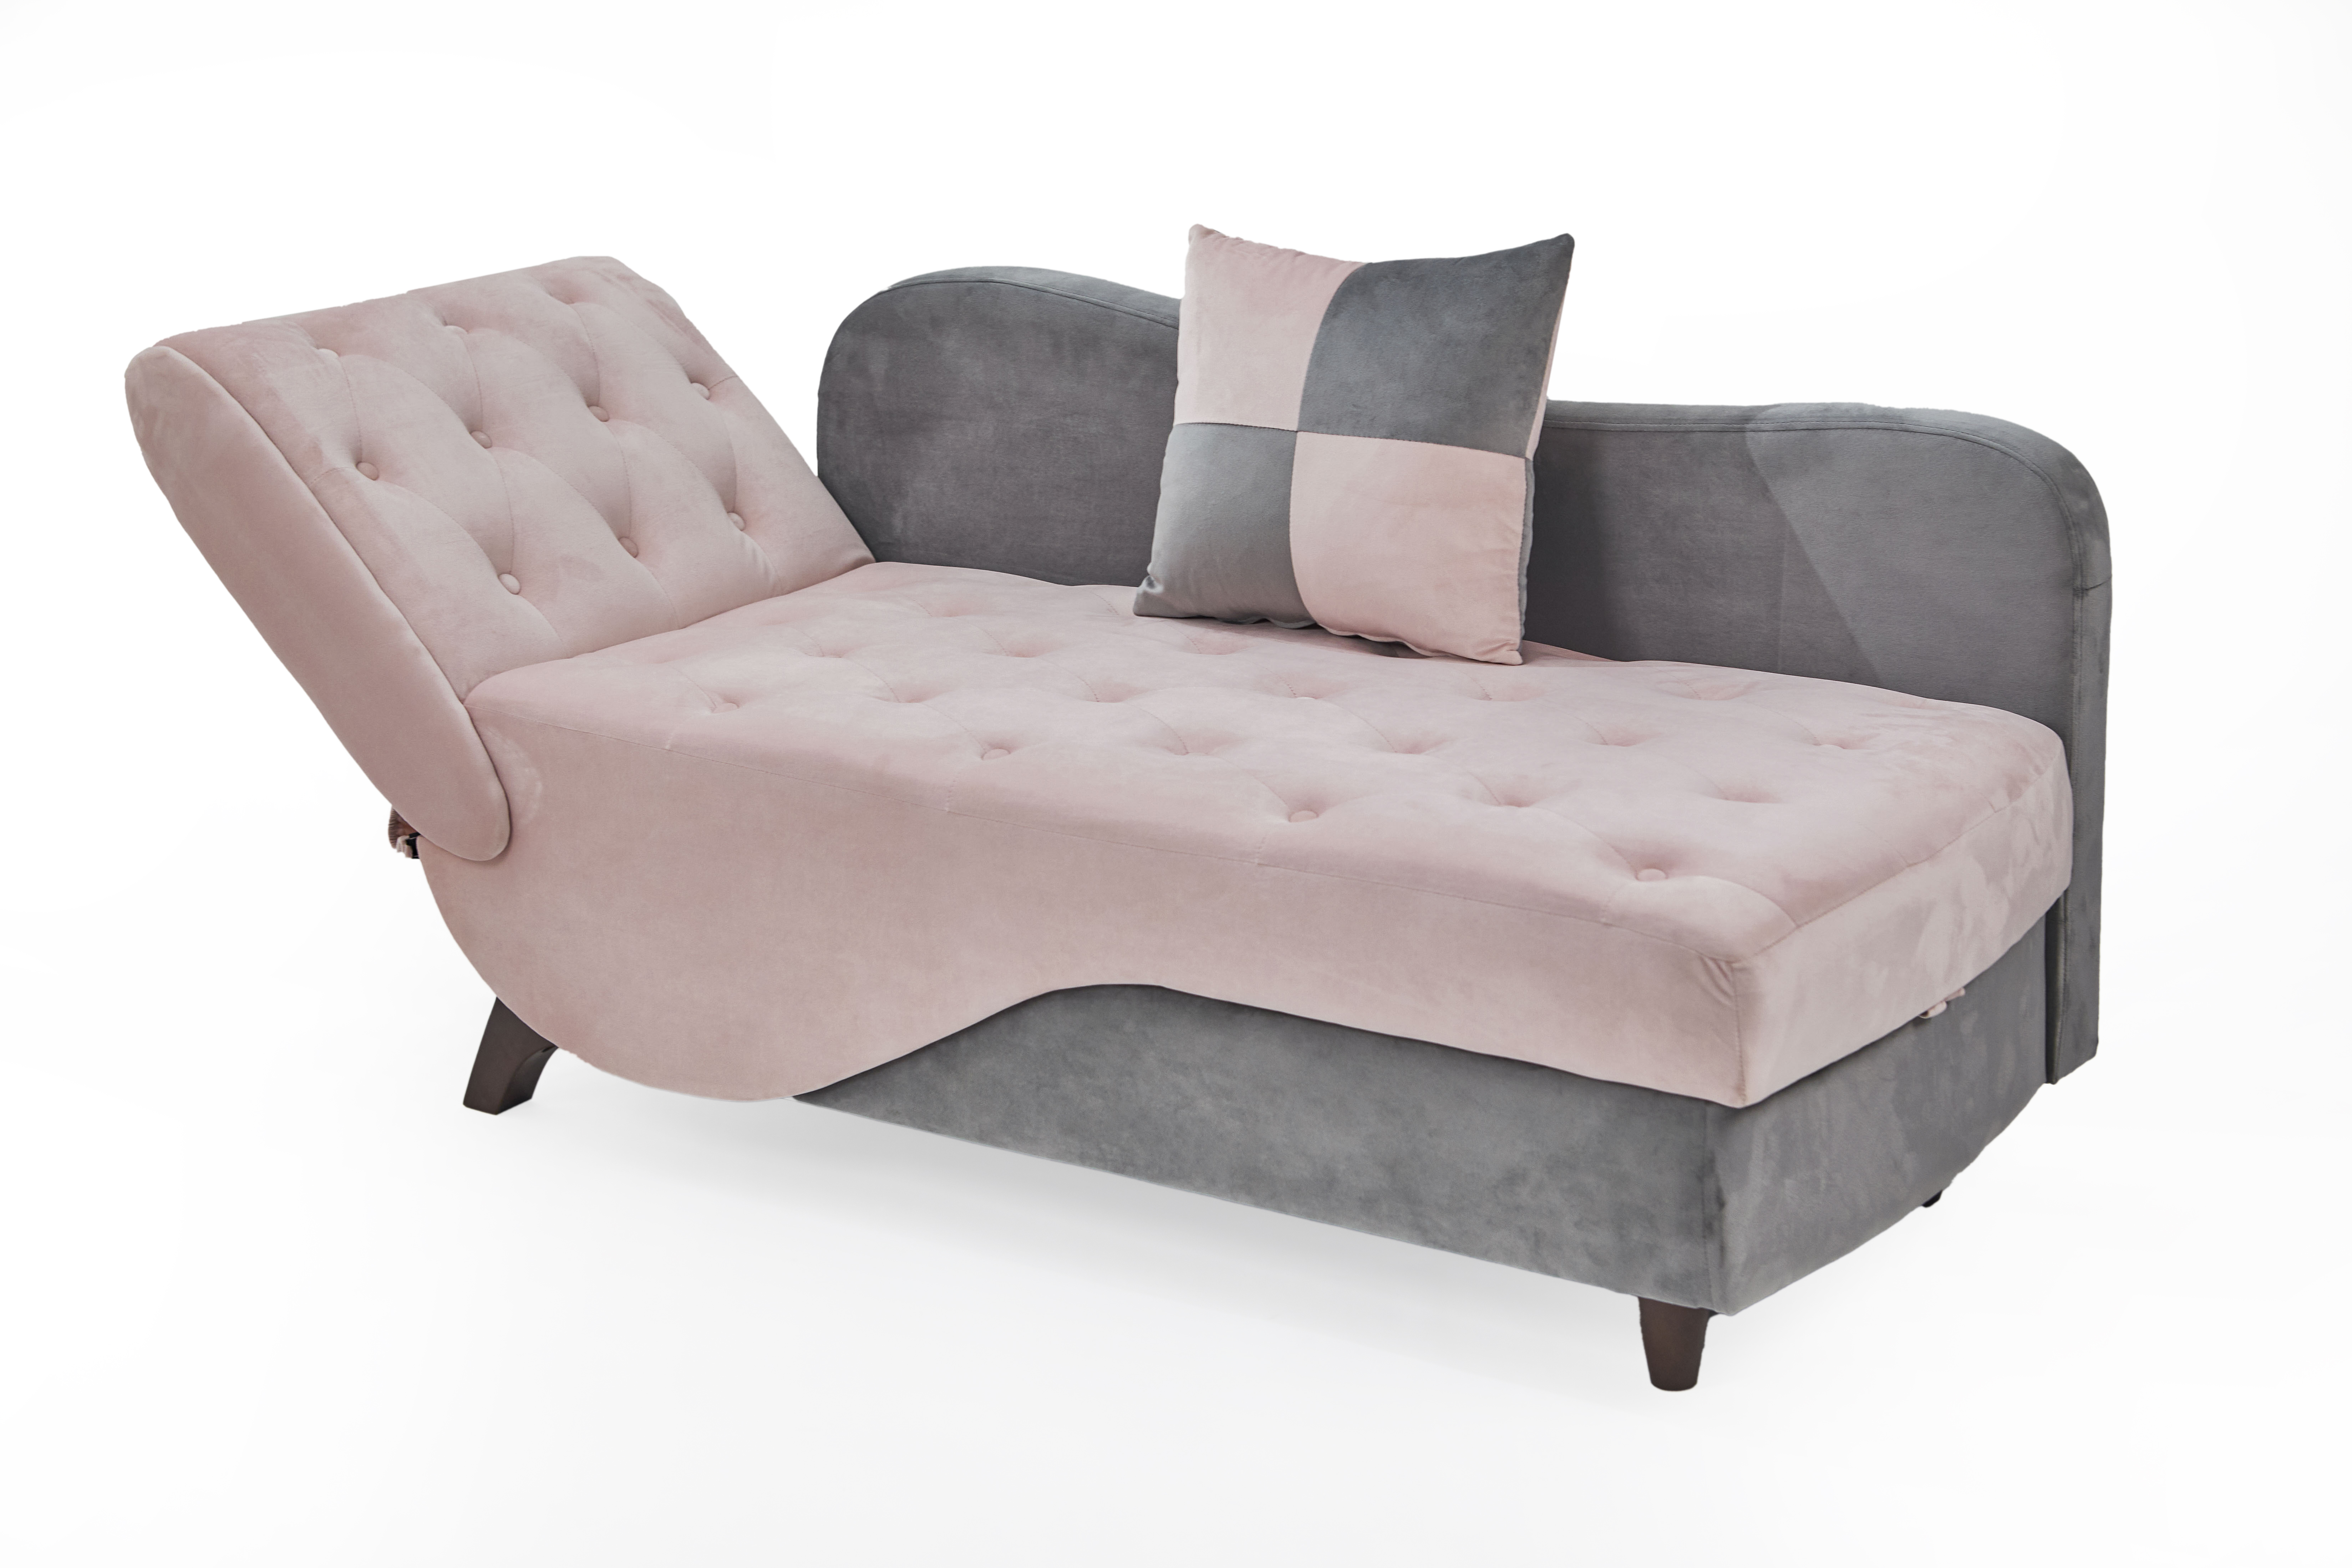 New+Pink adjustable living room sofa bed with storage cushions including a pillow-CASAINC